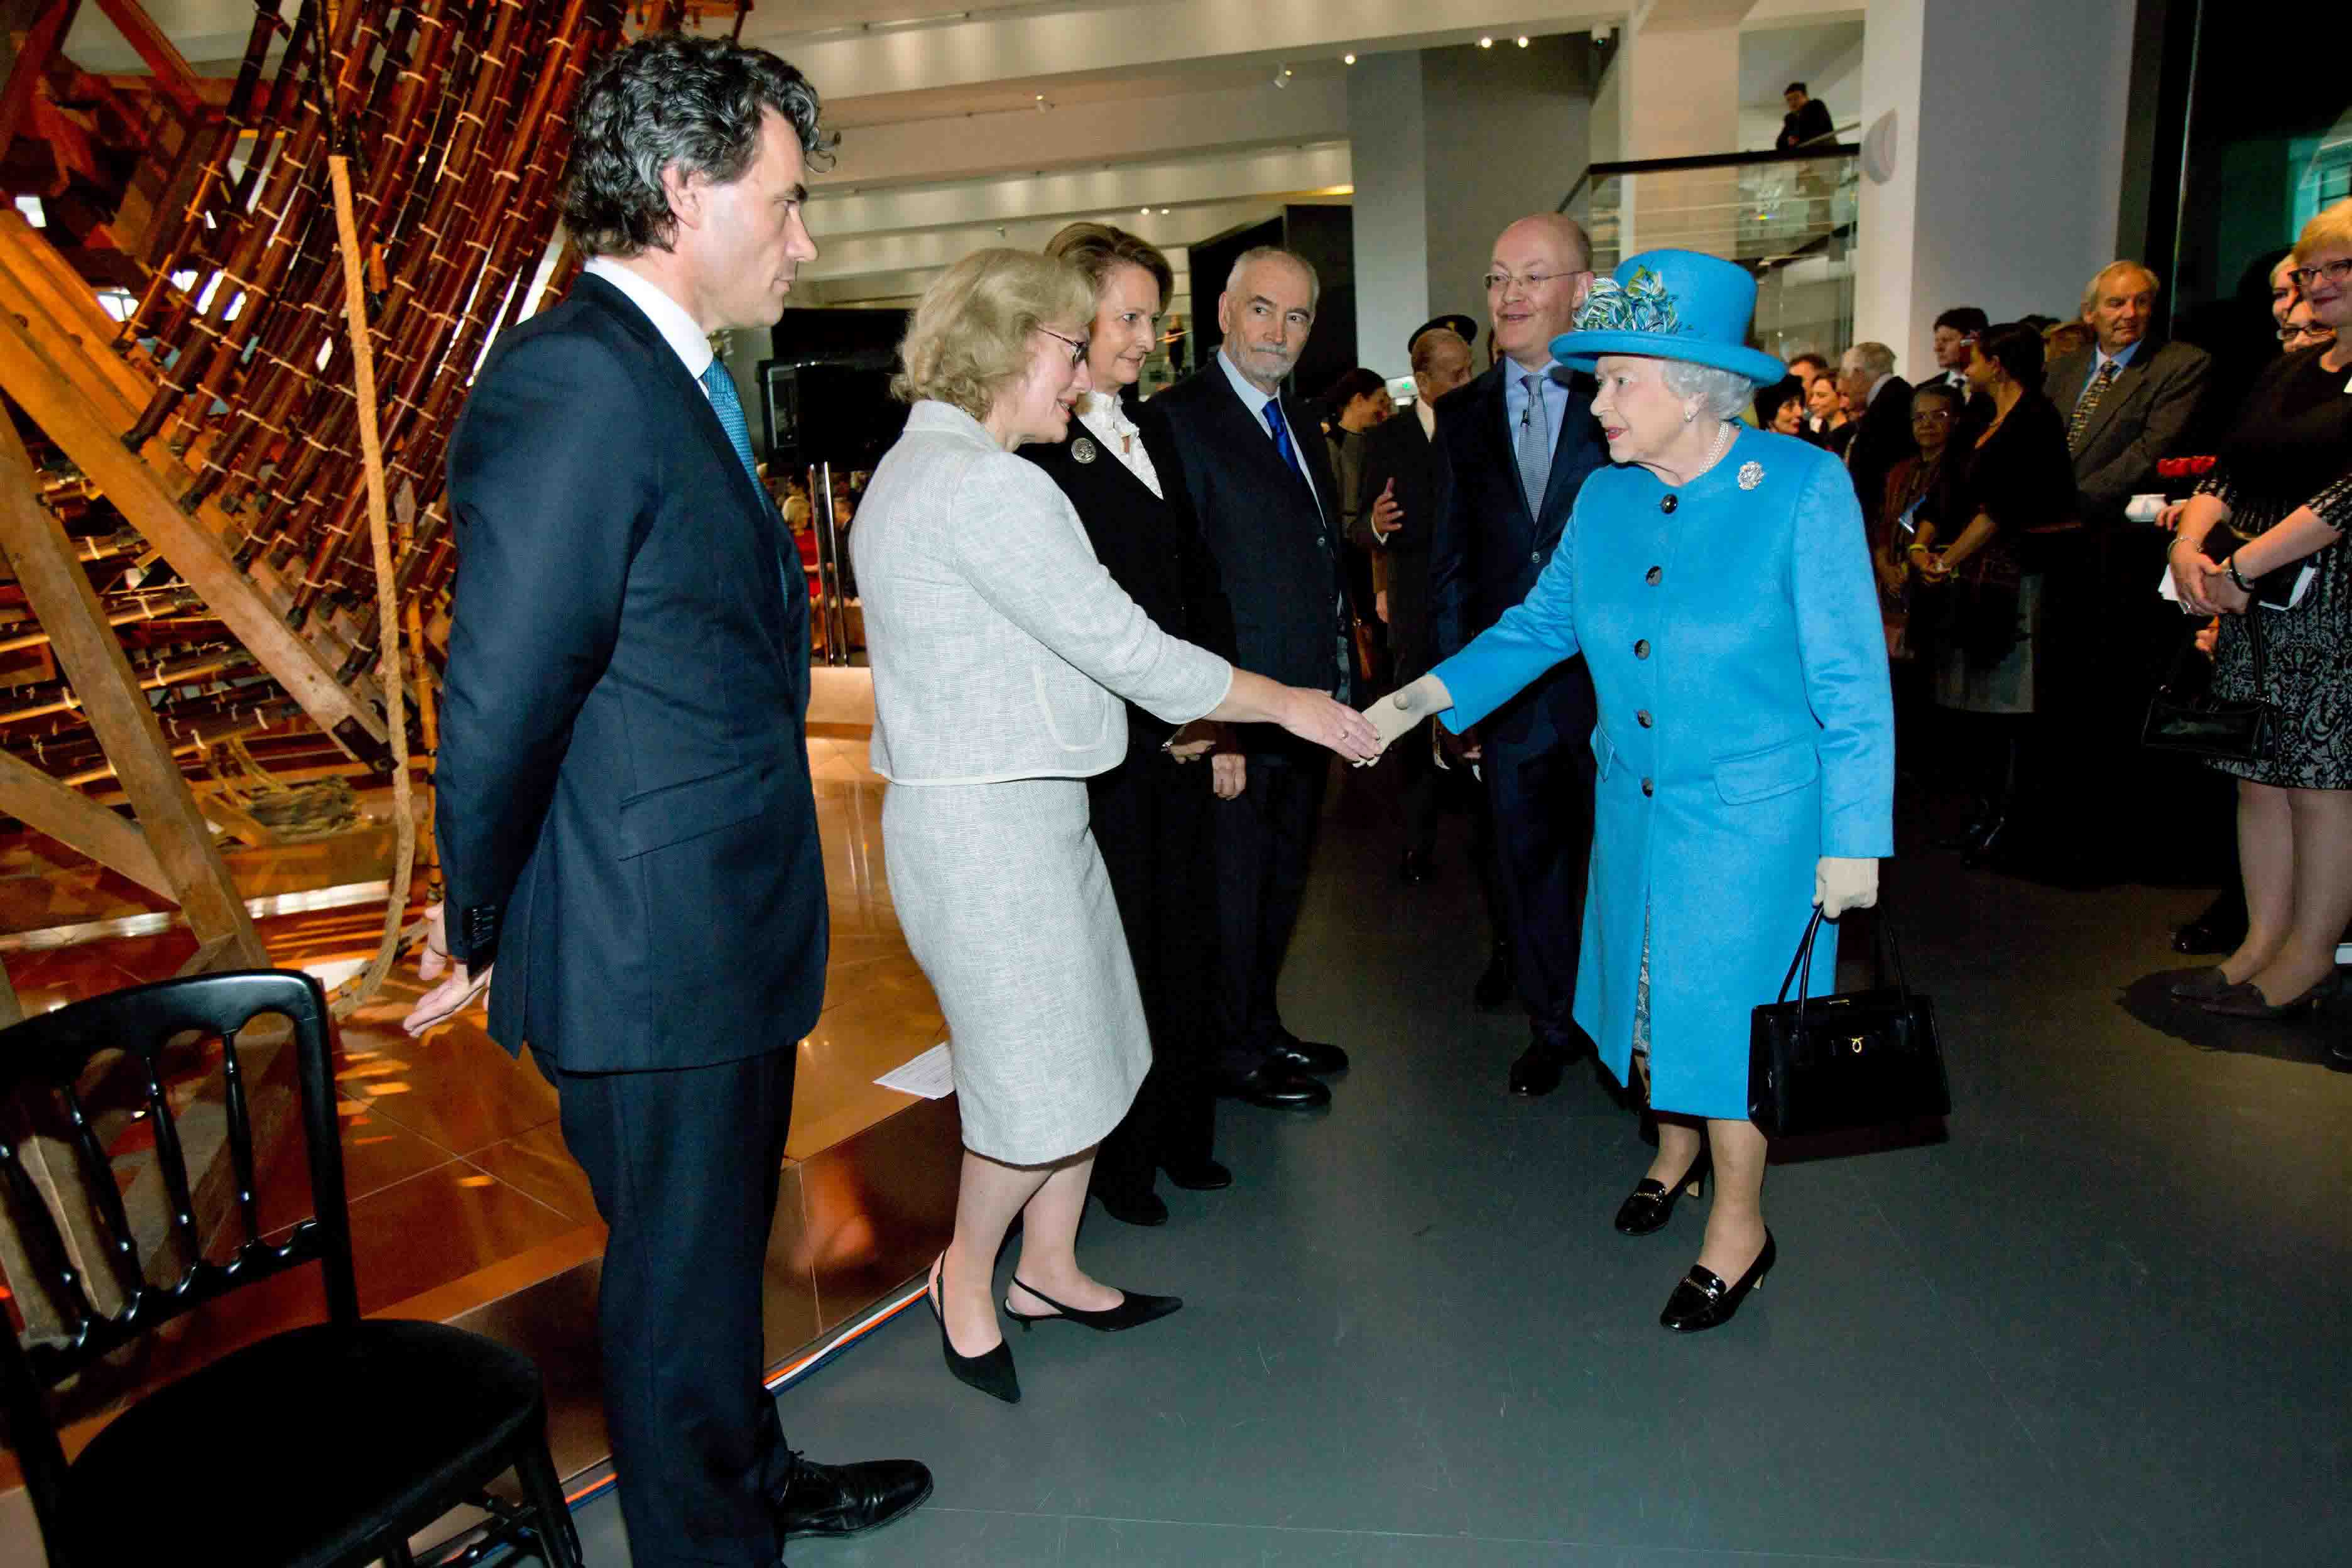 The Queen meets Carole Souter, CEO of the Heritage Lottery Fund at the opening of the Information Age gallery. Image credit: Tim Anderson